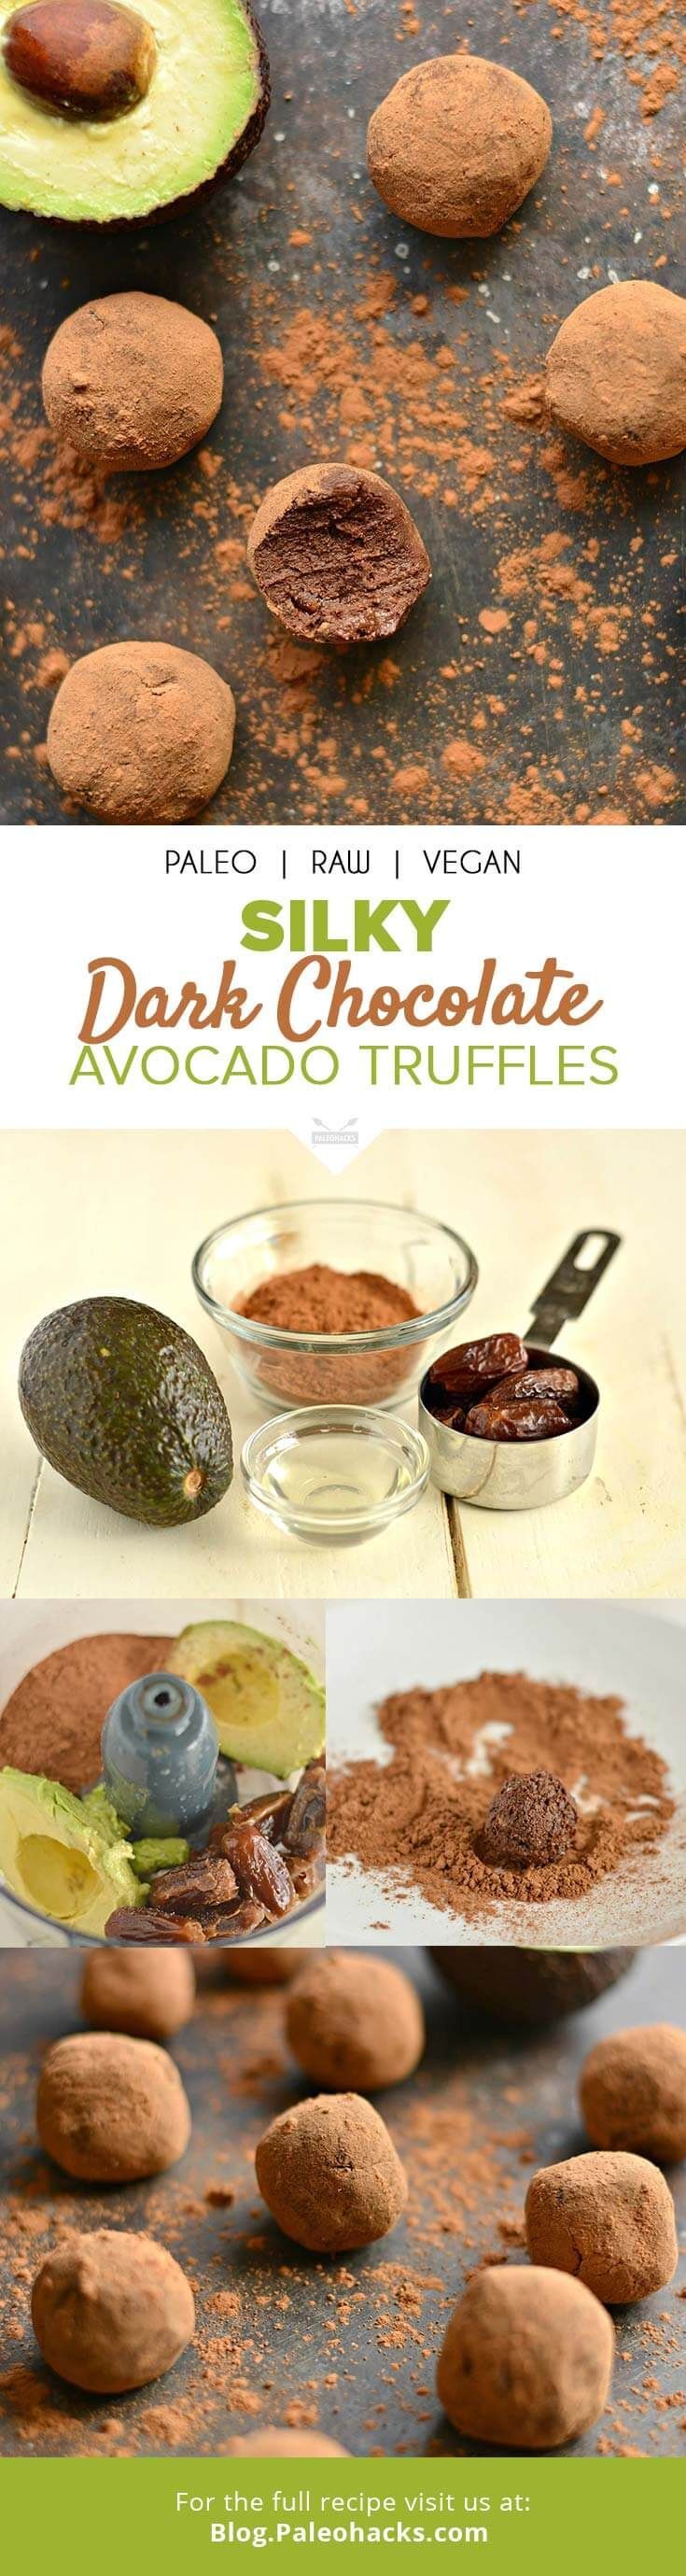 The secret behind these creamy chocolate truffles that taste sinfully good? A powerful, healthy ingredient: avocado! Get the